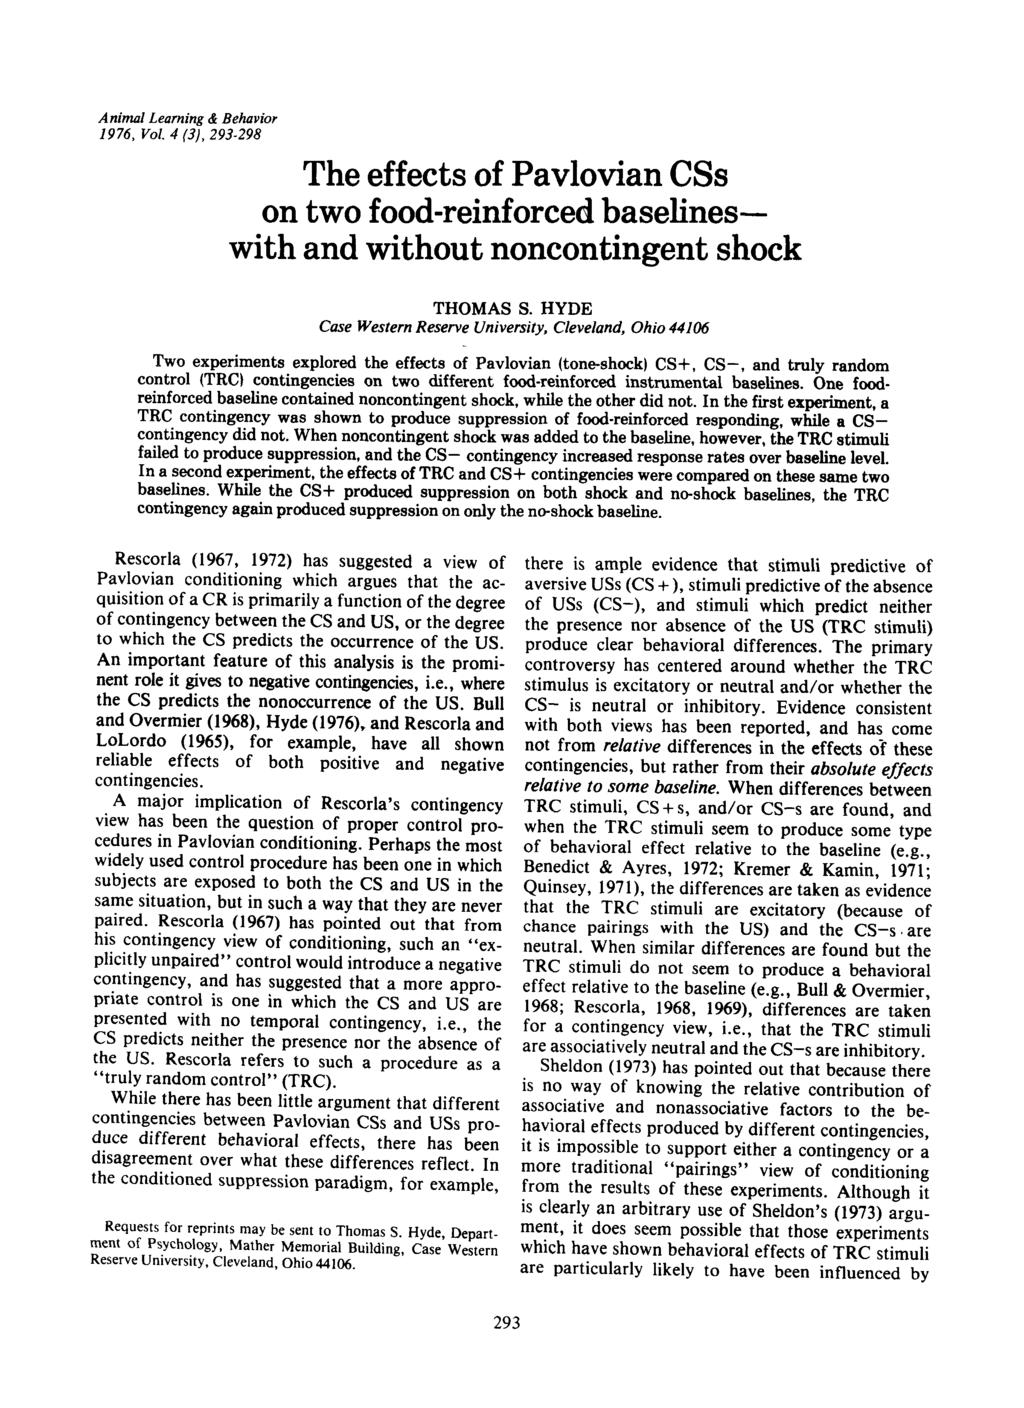 Animal Learning & Behavior 1976, Vol. 4 (3), 293-298 The effects of Pavlovian CSs on two food-reinforced baselineswith and without noncontingent shock THOMAS s.